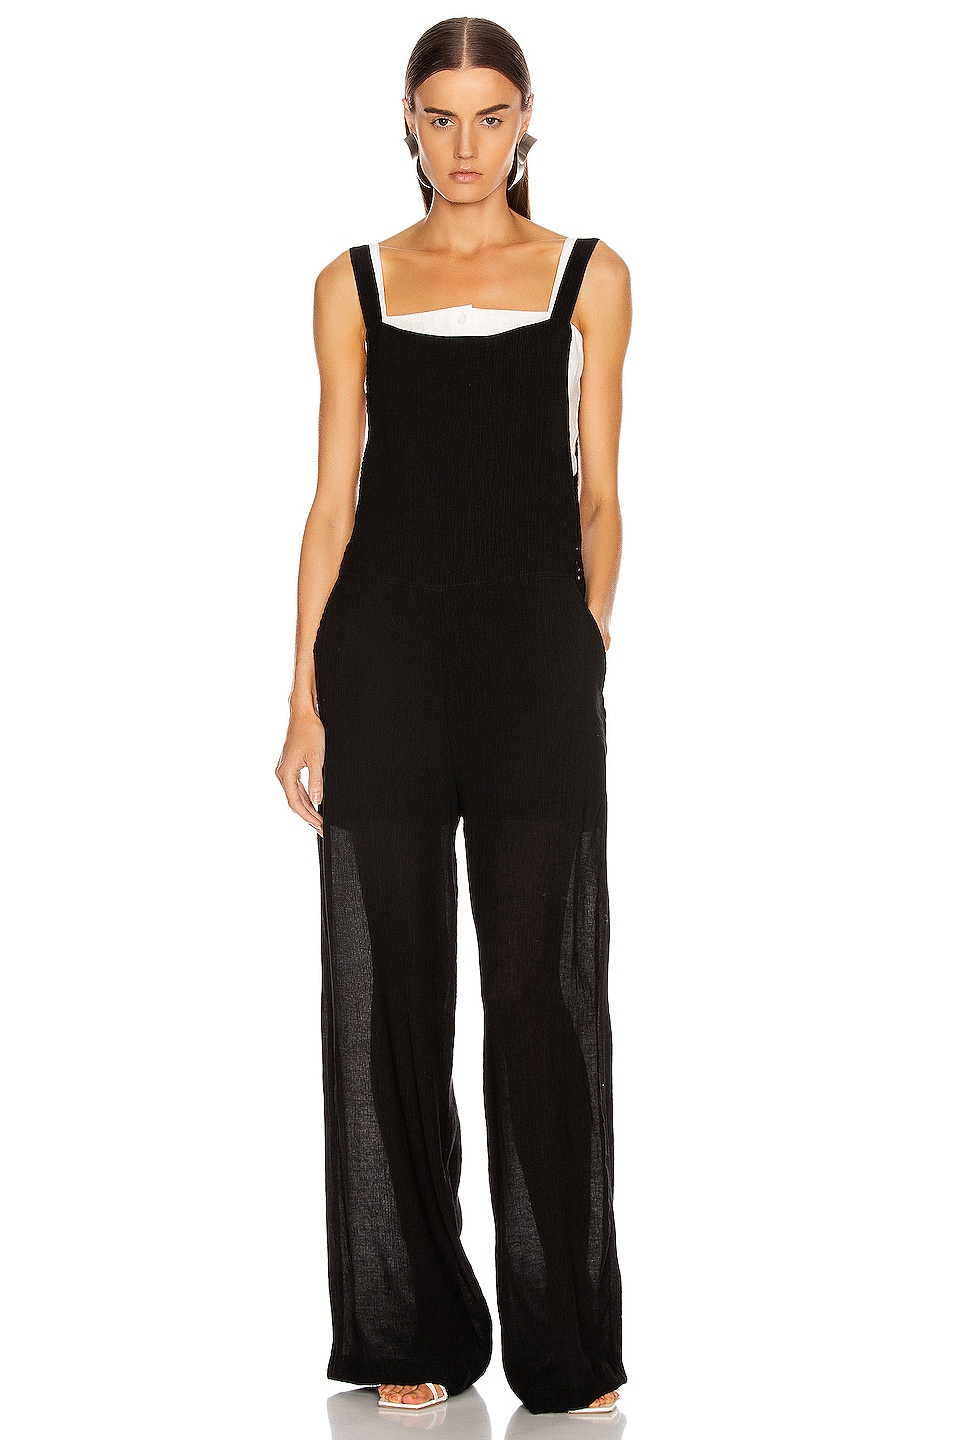 Image 1 of The Range Vapor Voile Overalls in Faded Black